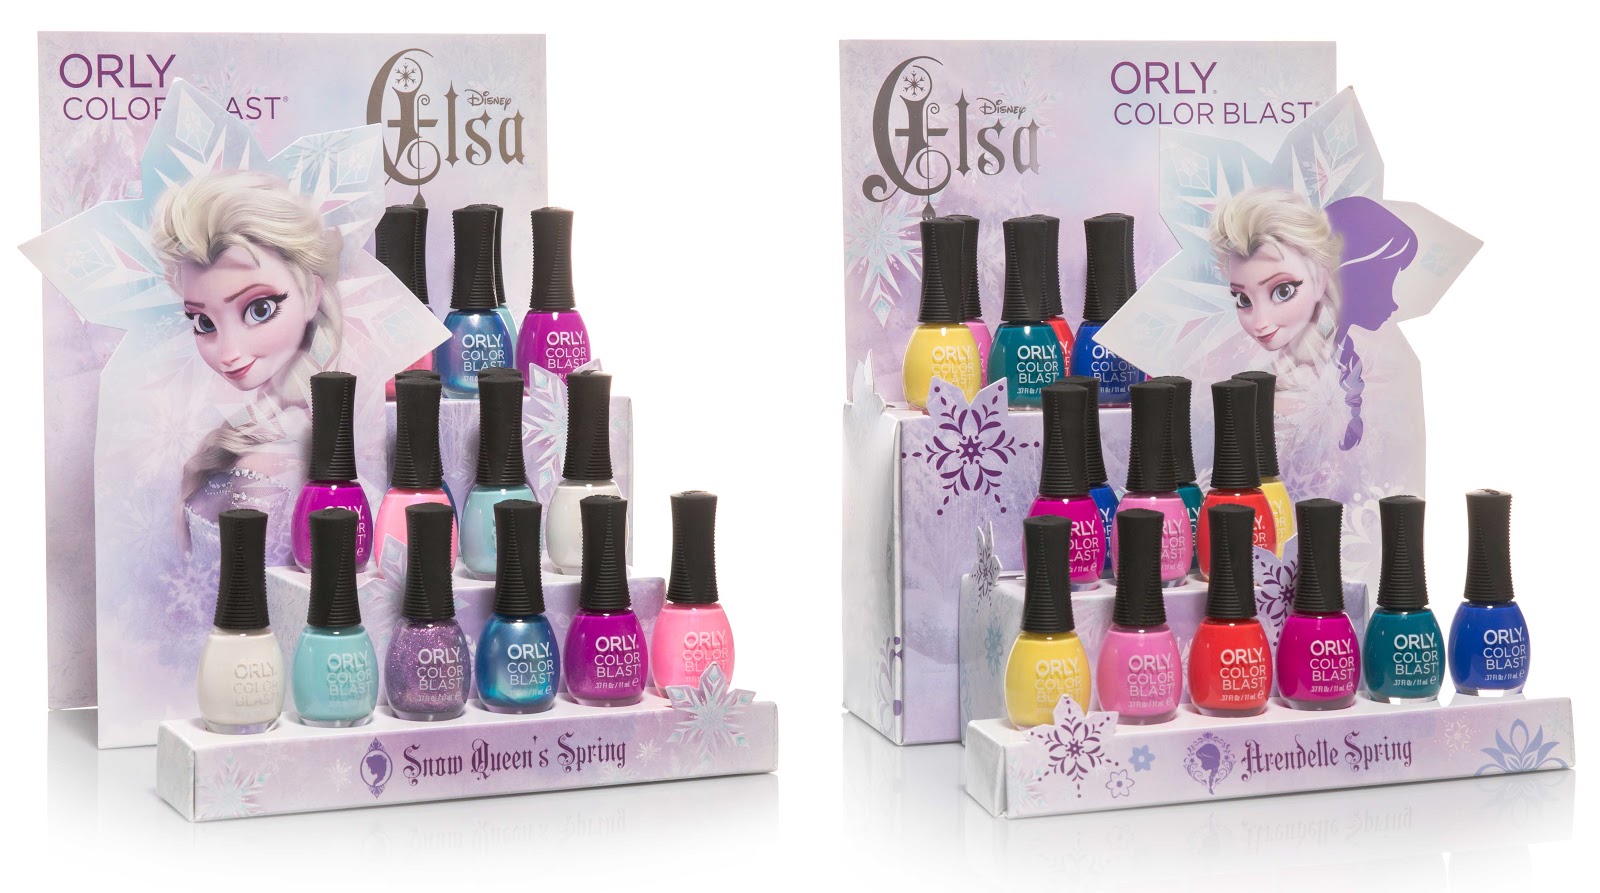 7. Orly Color Blast Nail Polish - wide 3